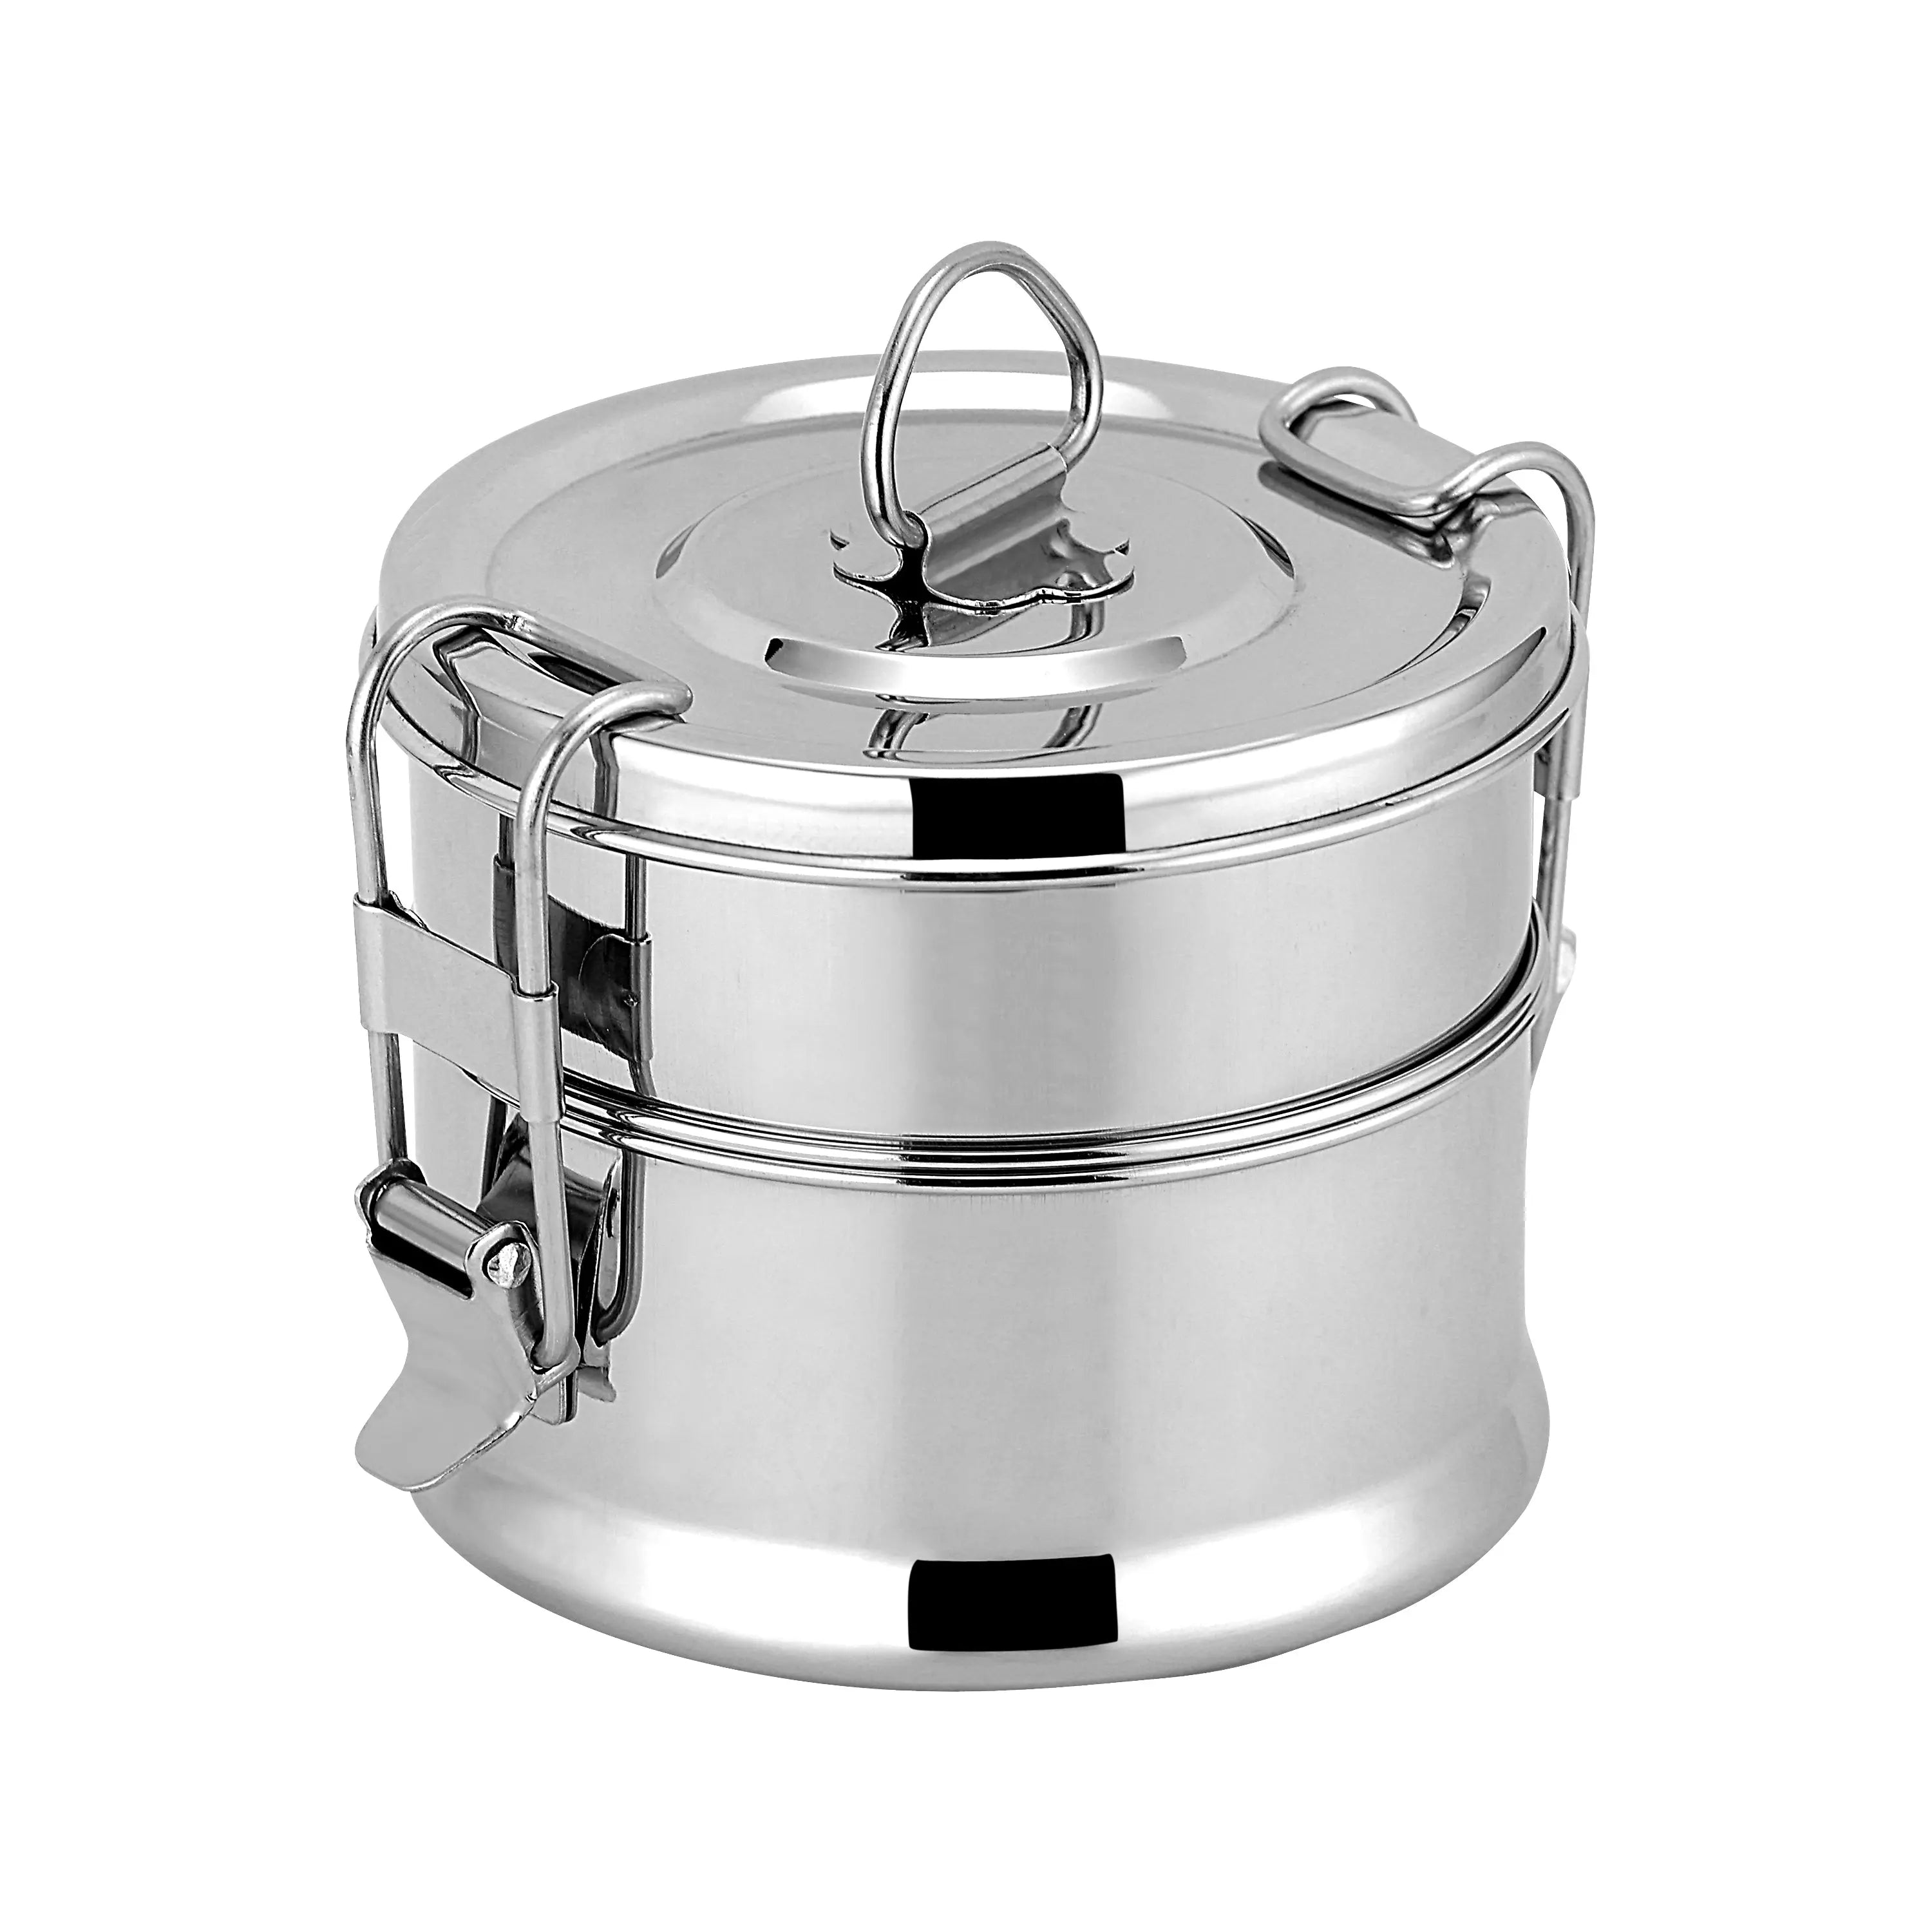 STAINLESS STEEL TIFFIN ROYAL - CROCKERY WALA AND COMPANY 